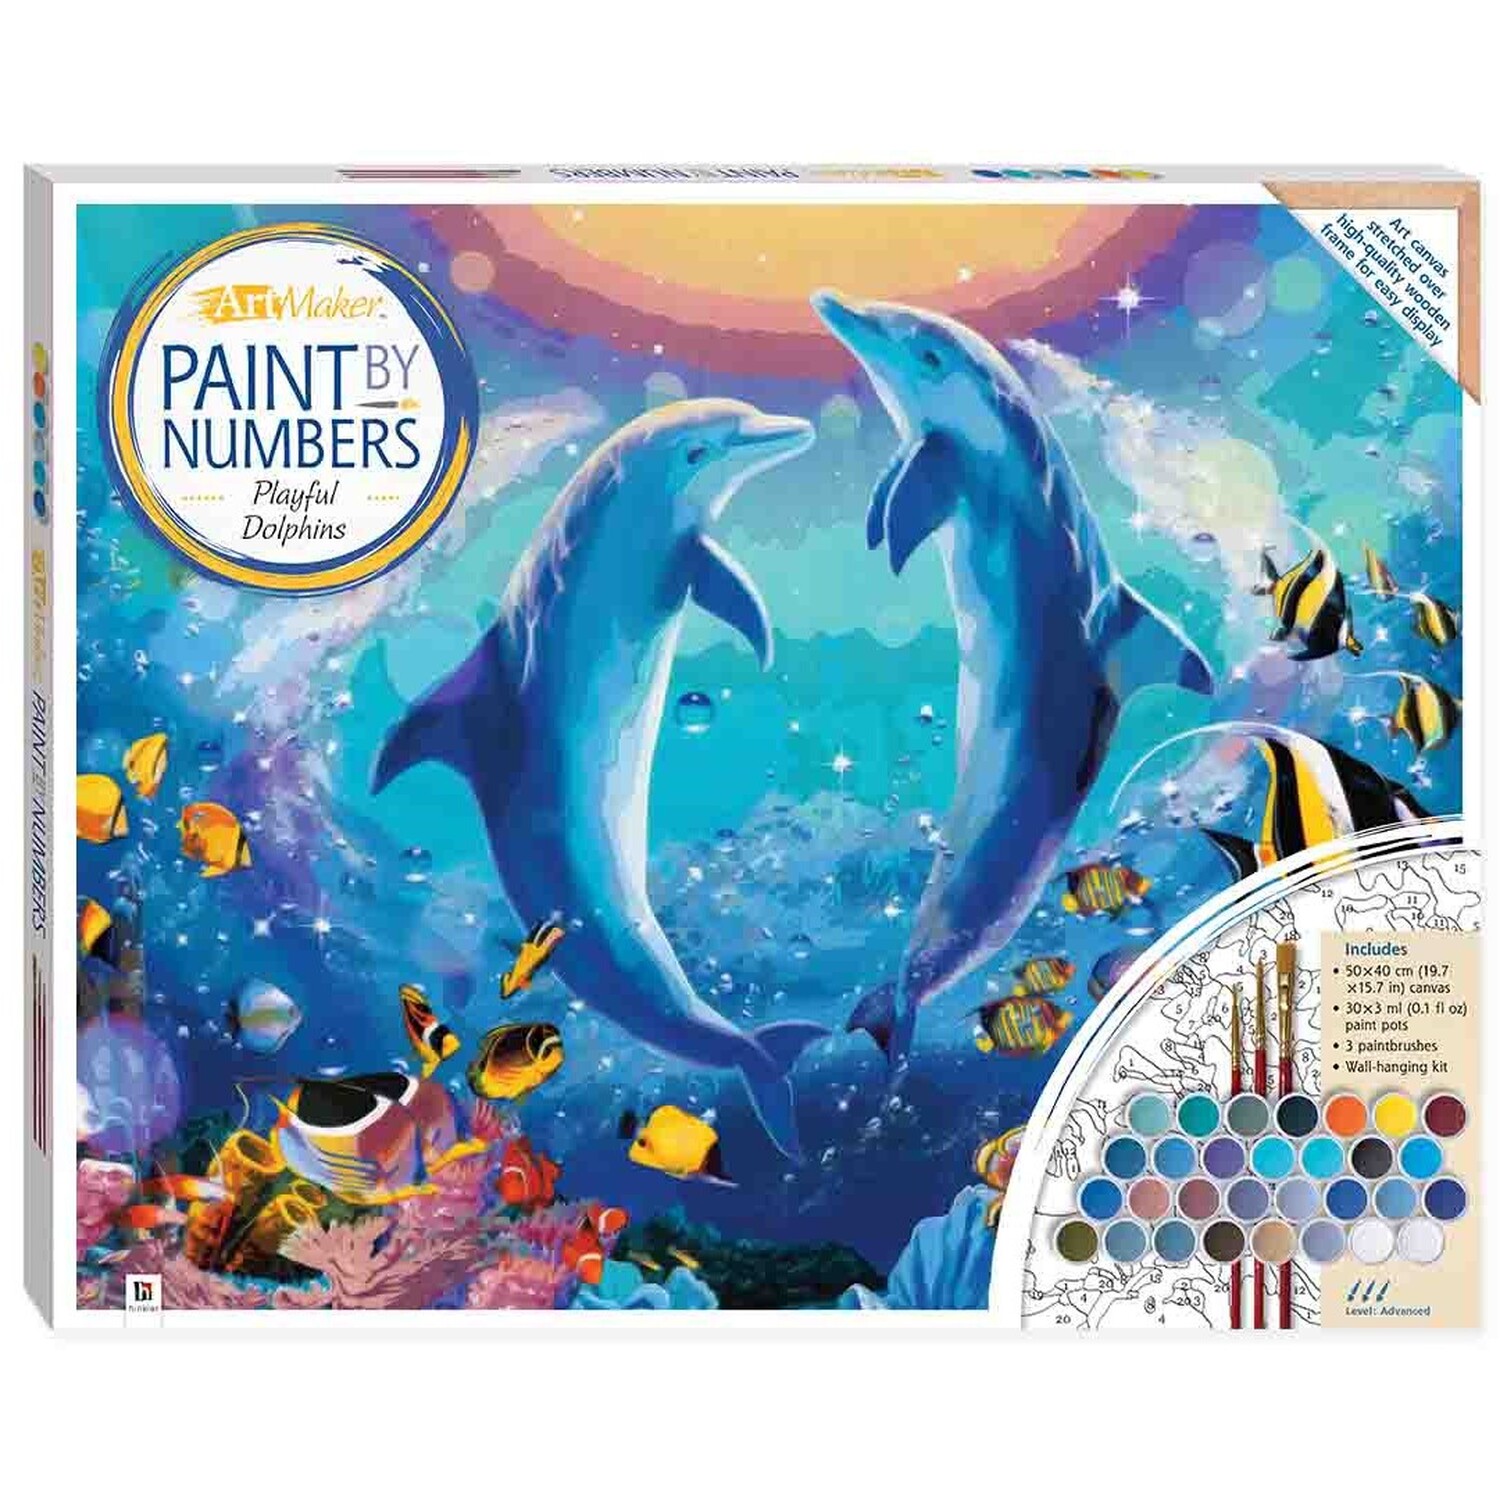 Hinkler Paint by Numbers Dolphin Canvas Kit Image